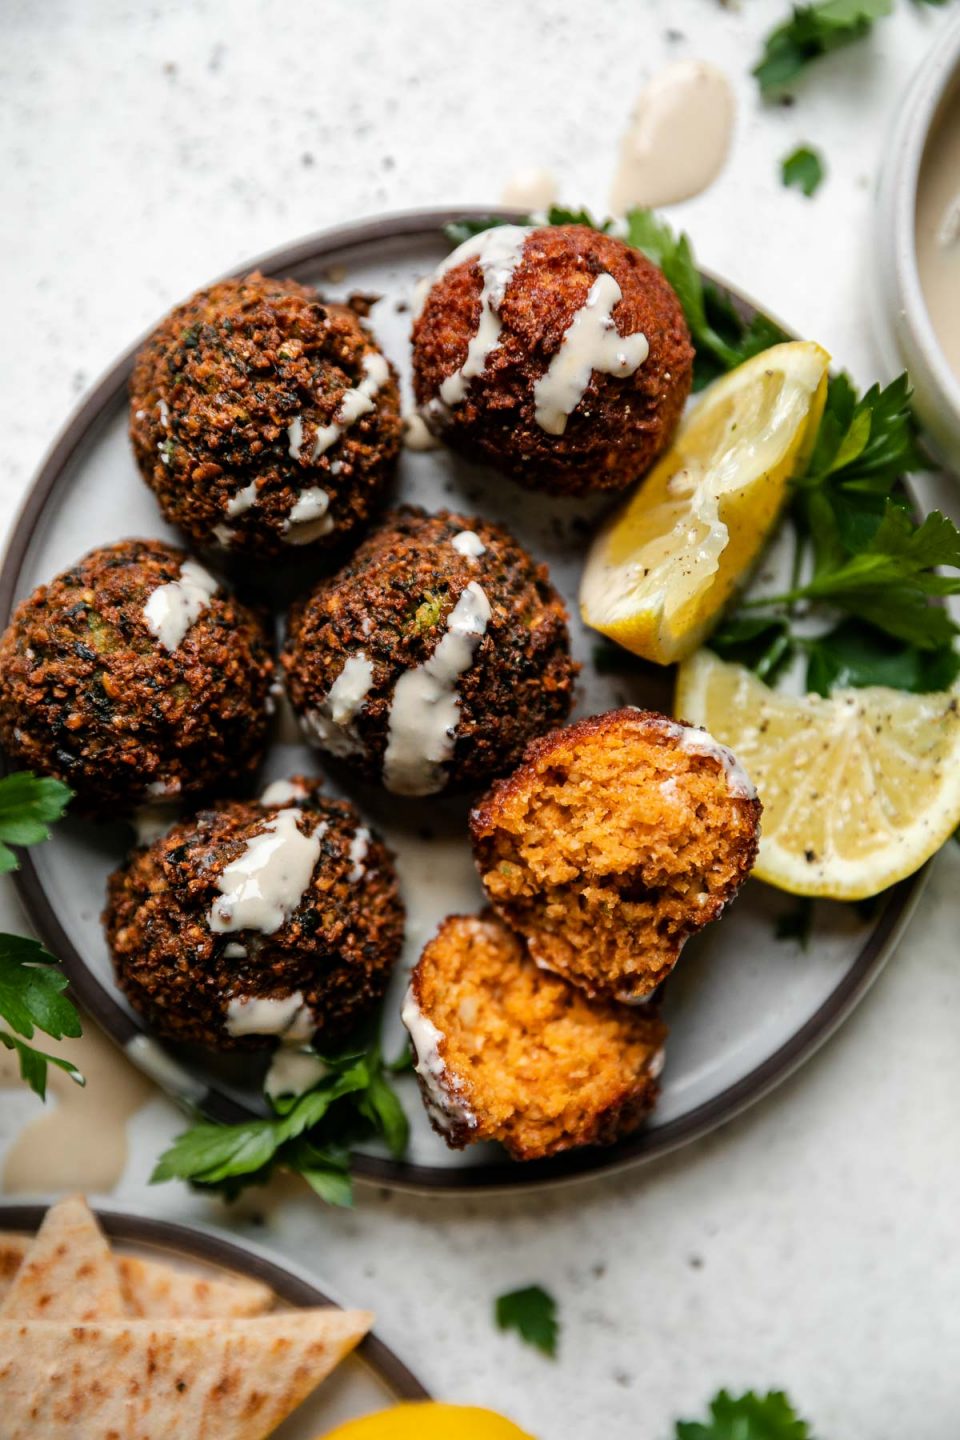 An overhead shot of a small gray ceramic plate filled with homemade crispy falafel balls. The plate is garnished with fresh parsley, lemon wedges, and a drizzle of tahini sauce. A small white bowl filled with tahini sauce and another small gray ceramic plate filled with pita rests alongside the falafel balls on the plate at center. All items sit atop a creamy white textured surface.